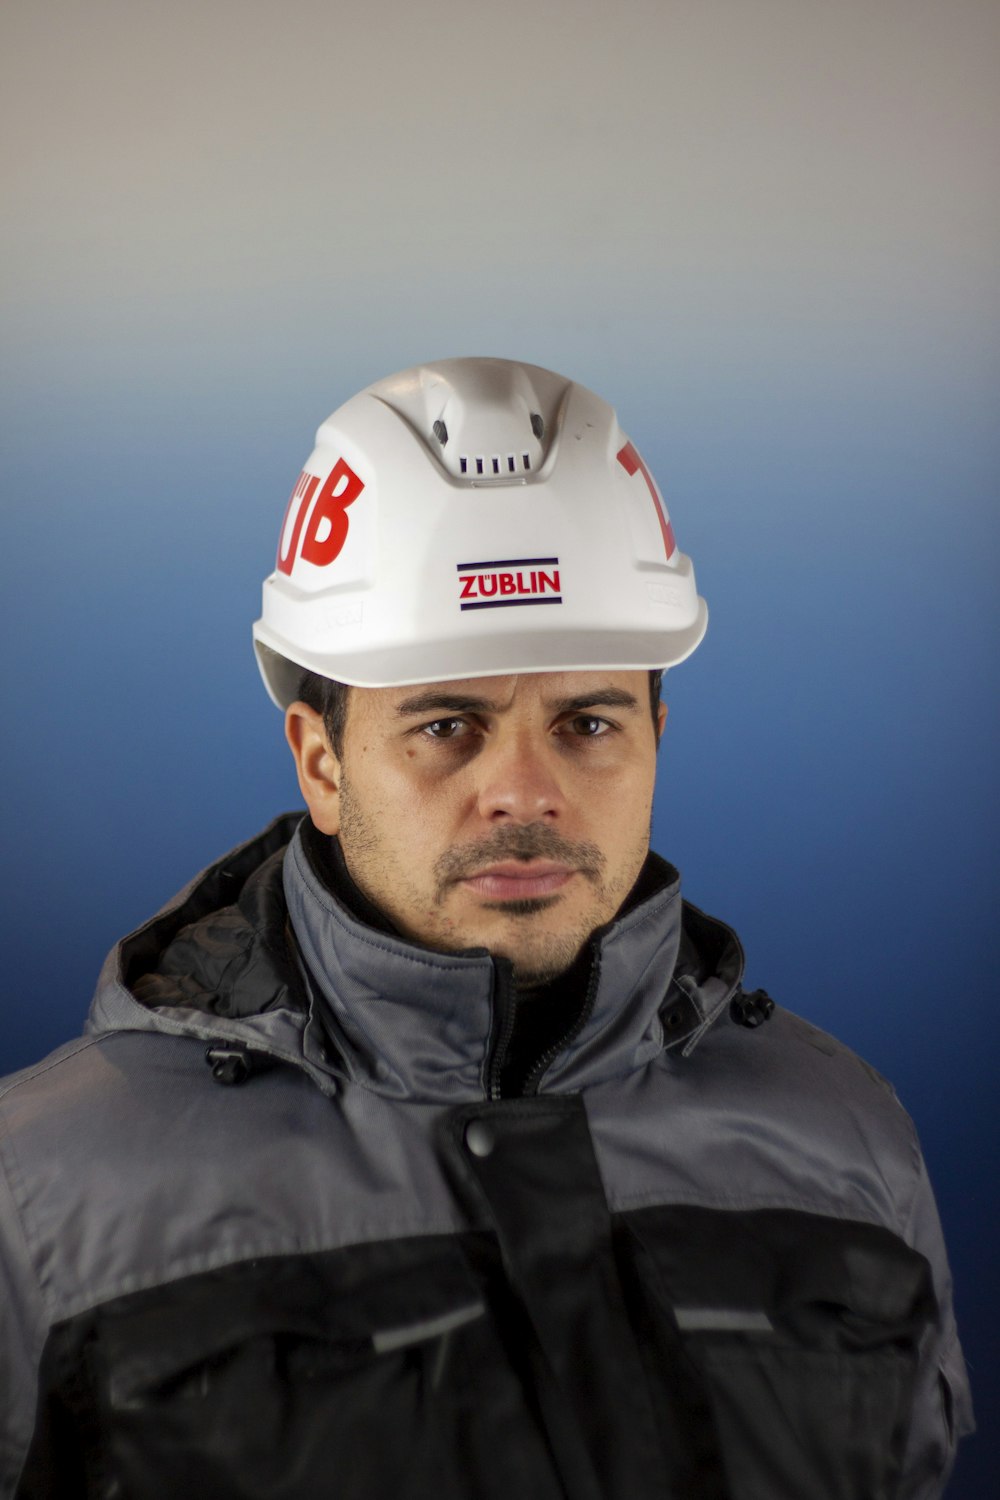 a man wearing a hard hat and jacket